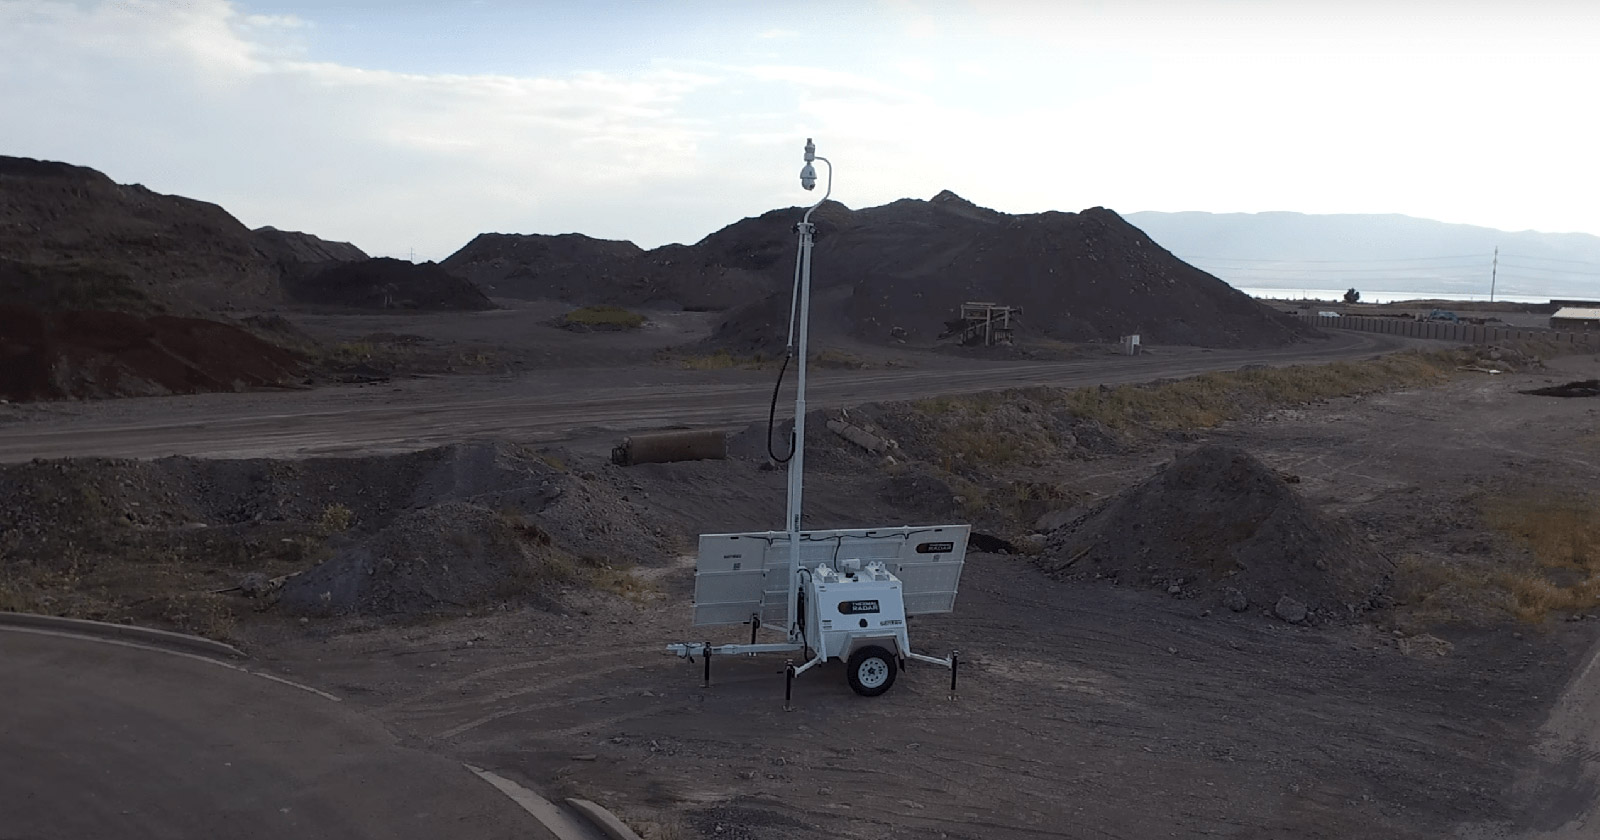 Mobile Surveillance Stations for the protection of construction sites